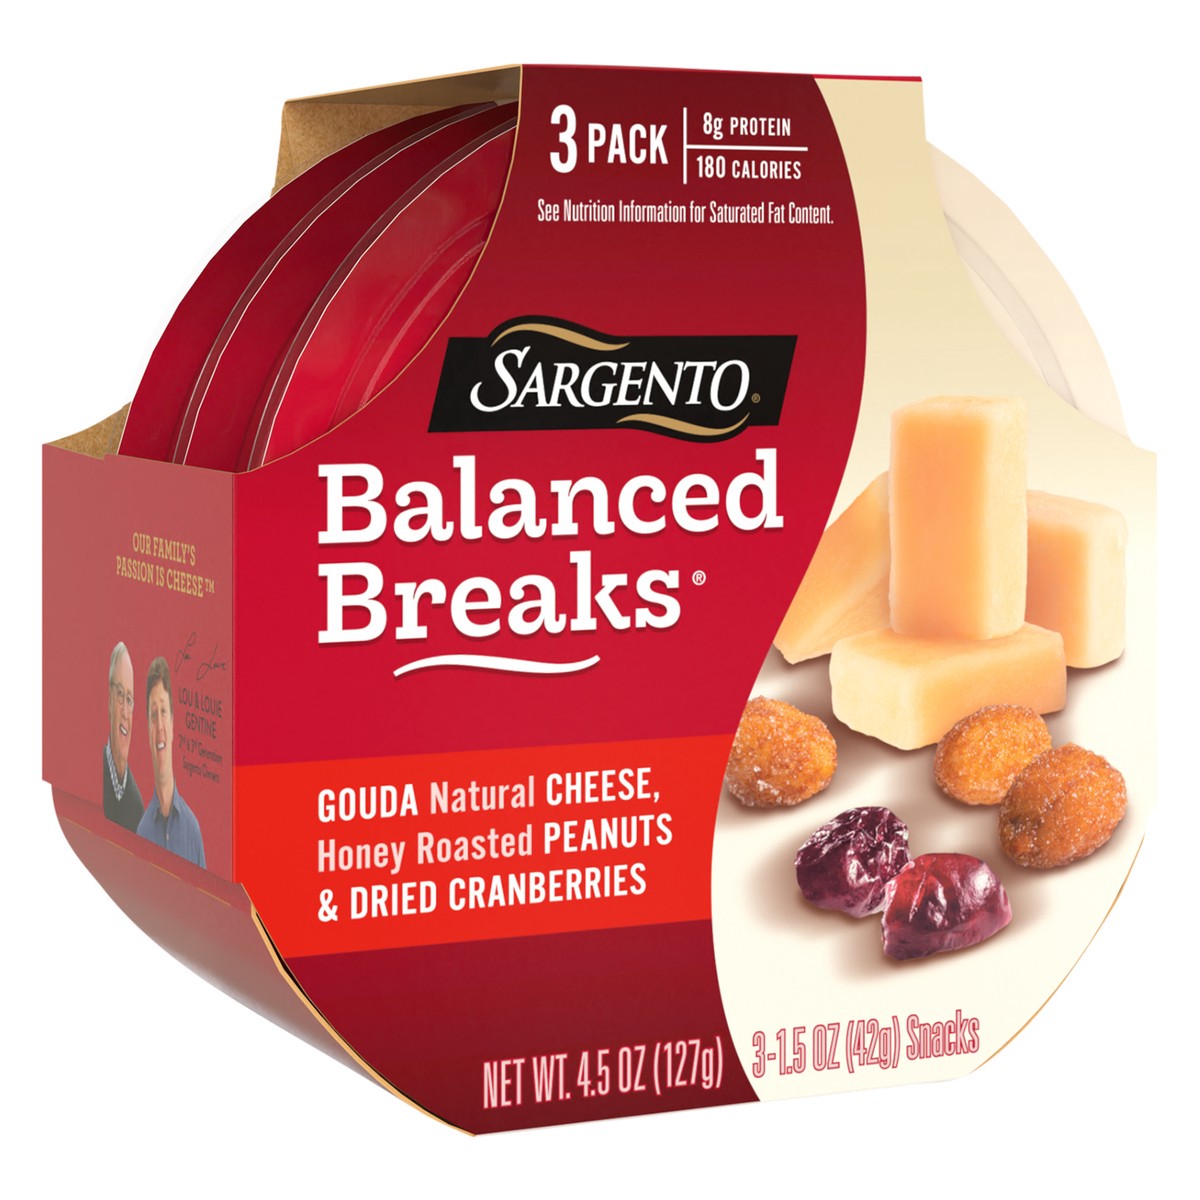 slide 9 of 9, Sargento Balanced Breaks with Gouda Natural Cheese, Honey Roasted Peanuts and Dried Cranberries, 1.5 oz., 3-Pack, 3 ct; 1.5 oz